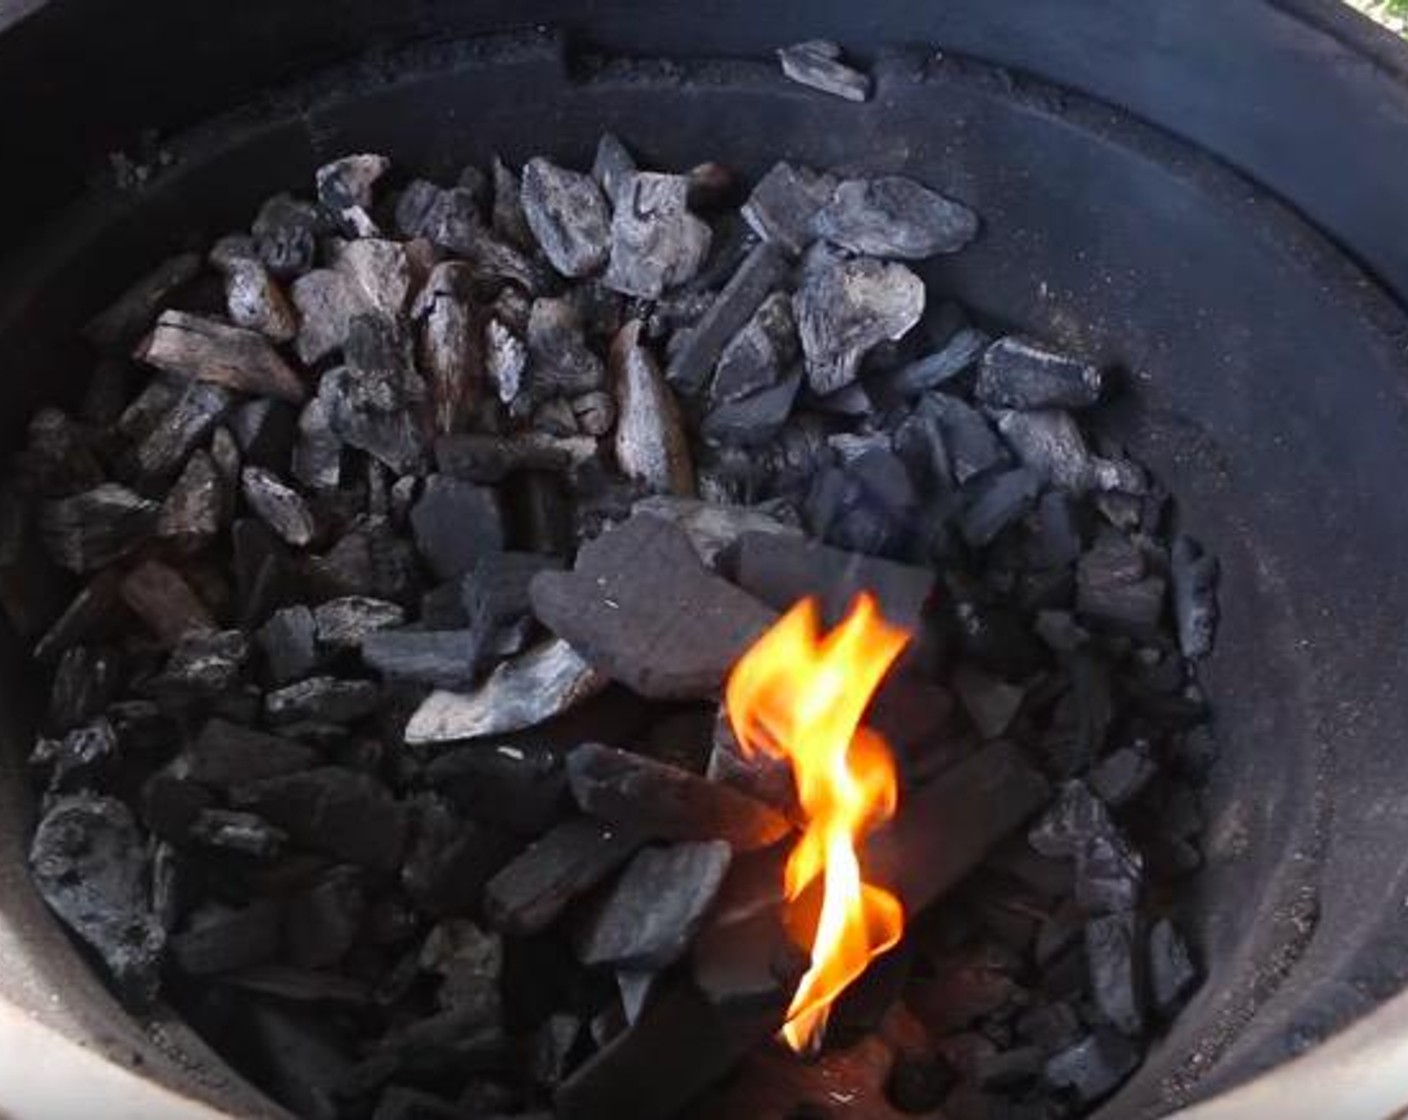 step 1 Prepare Big Green Egg or other grill for indirect cooking. Maintain grill temp of 300 degrees F (150 degrees C). Add cherry wood chunks to hot coals for smoke.